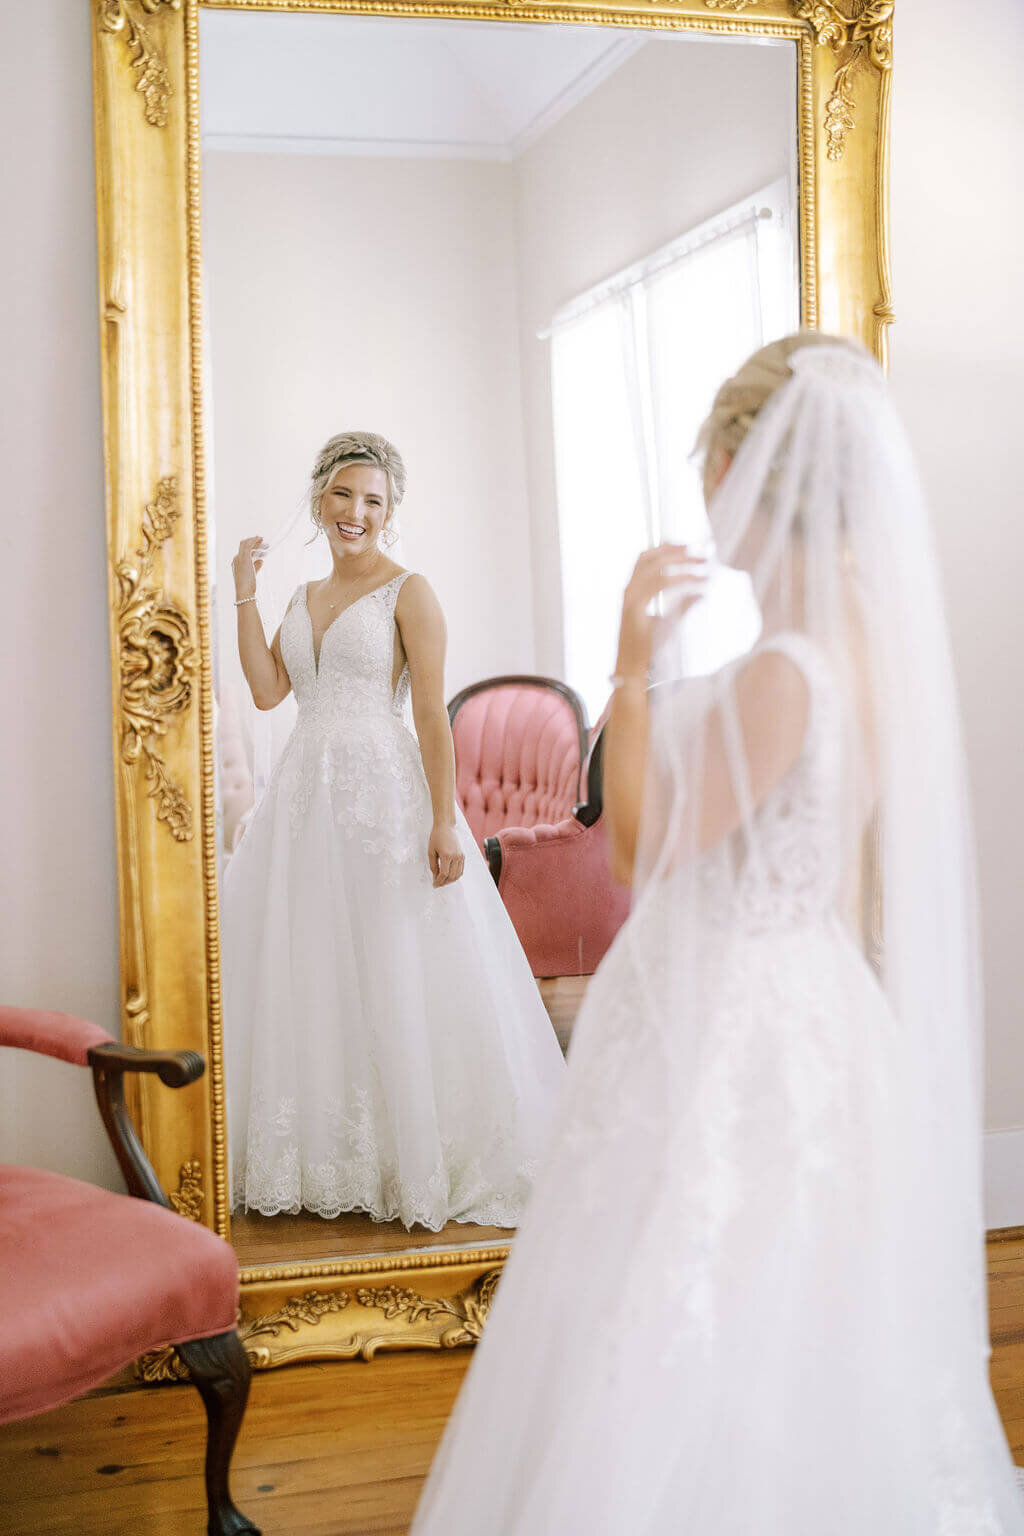 bride looking at herself in mirror during getting ready portraits